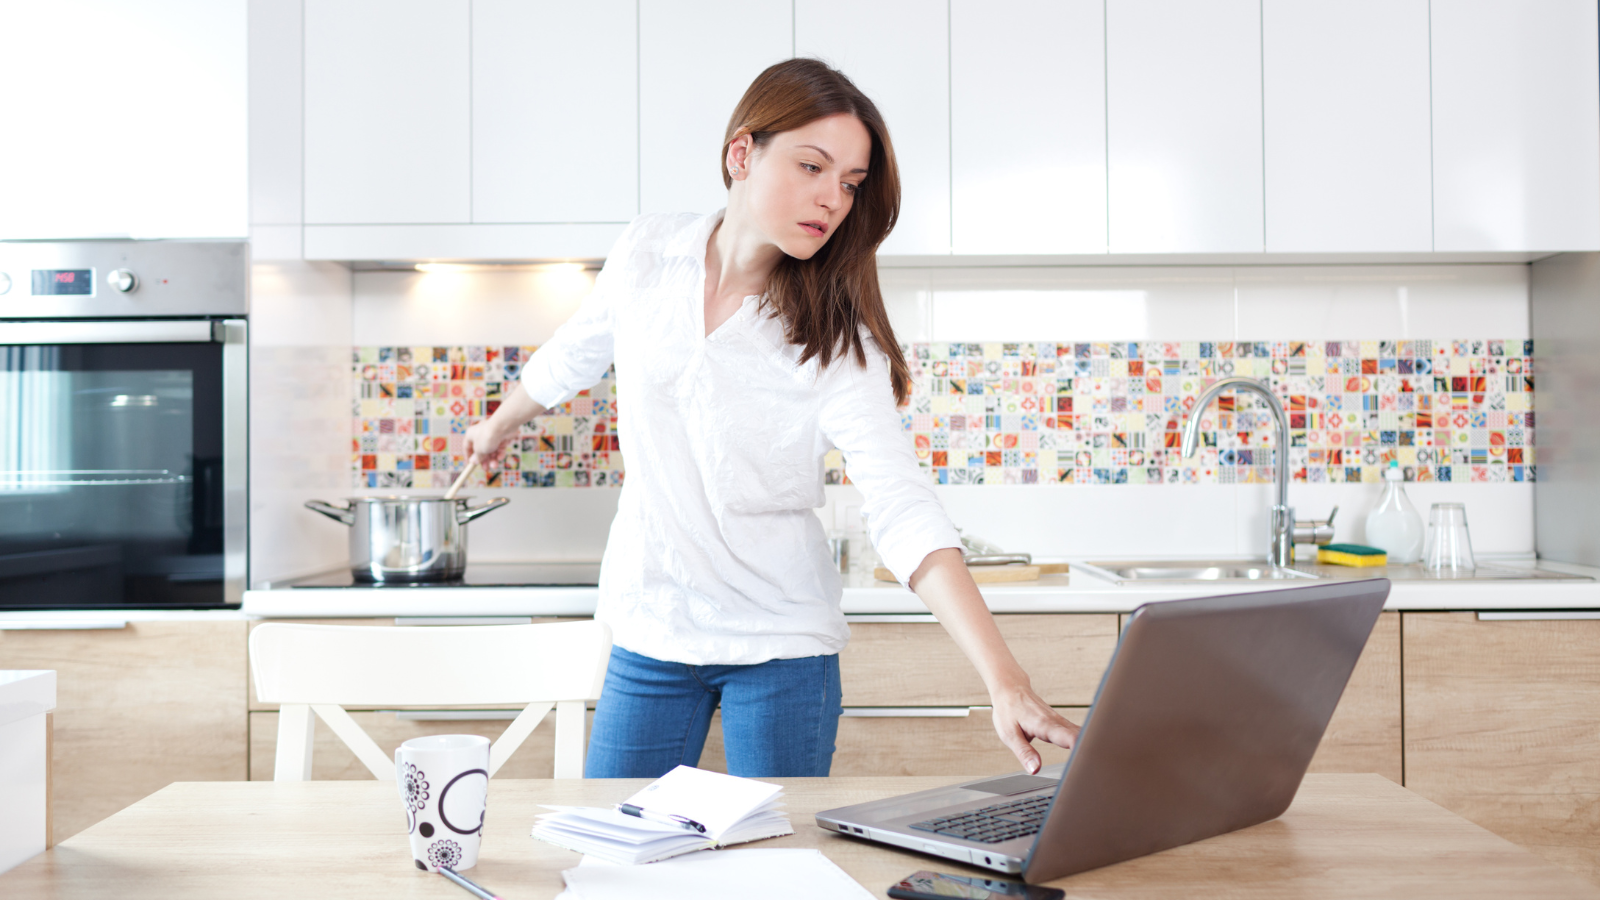 Woman watching computer and cooking